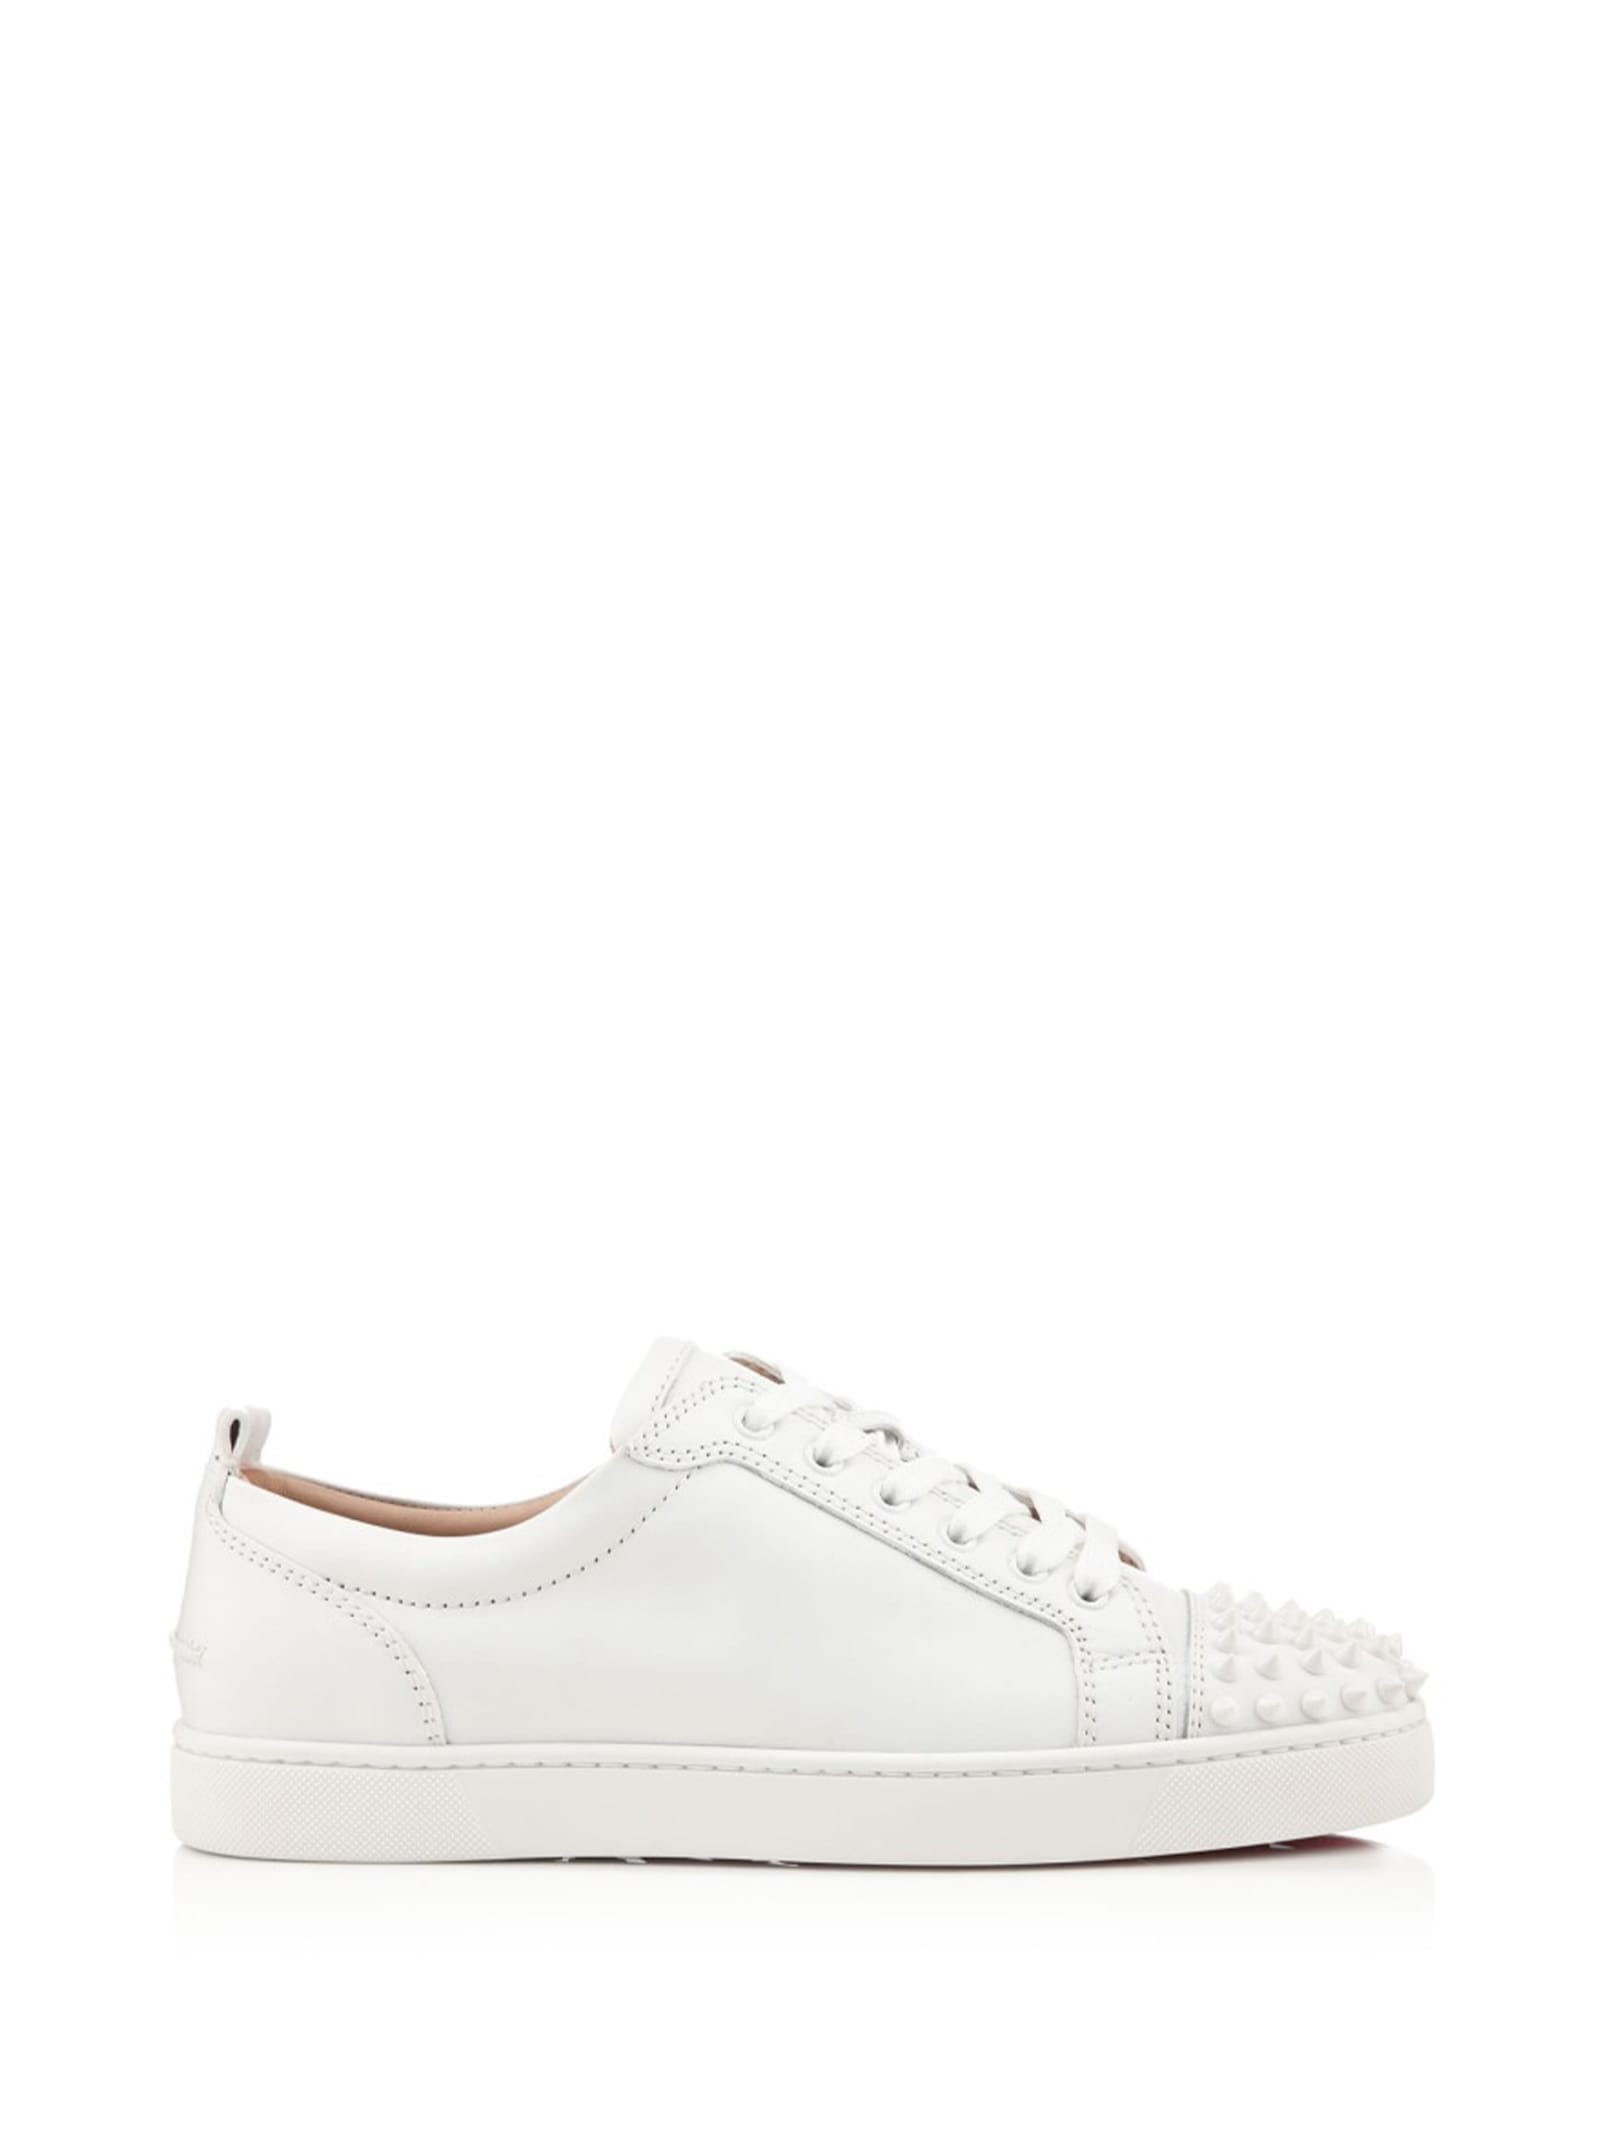 CHRISTIAN LOUBOUTIN LOUIS SNEAKERS WITH SPIKES